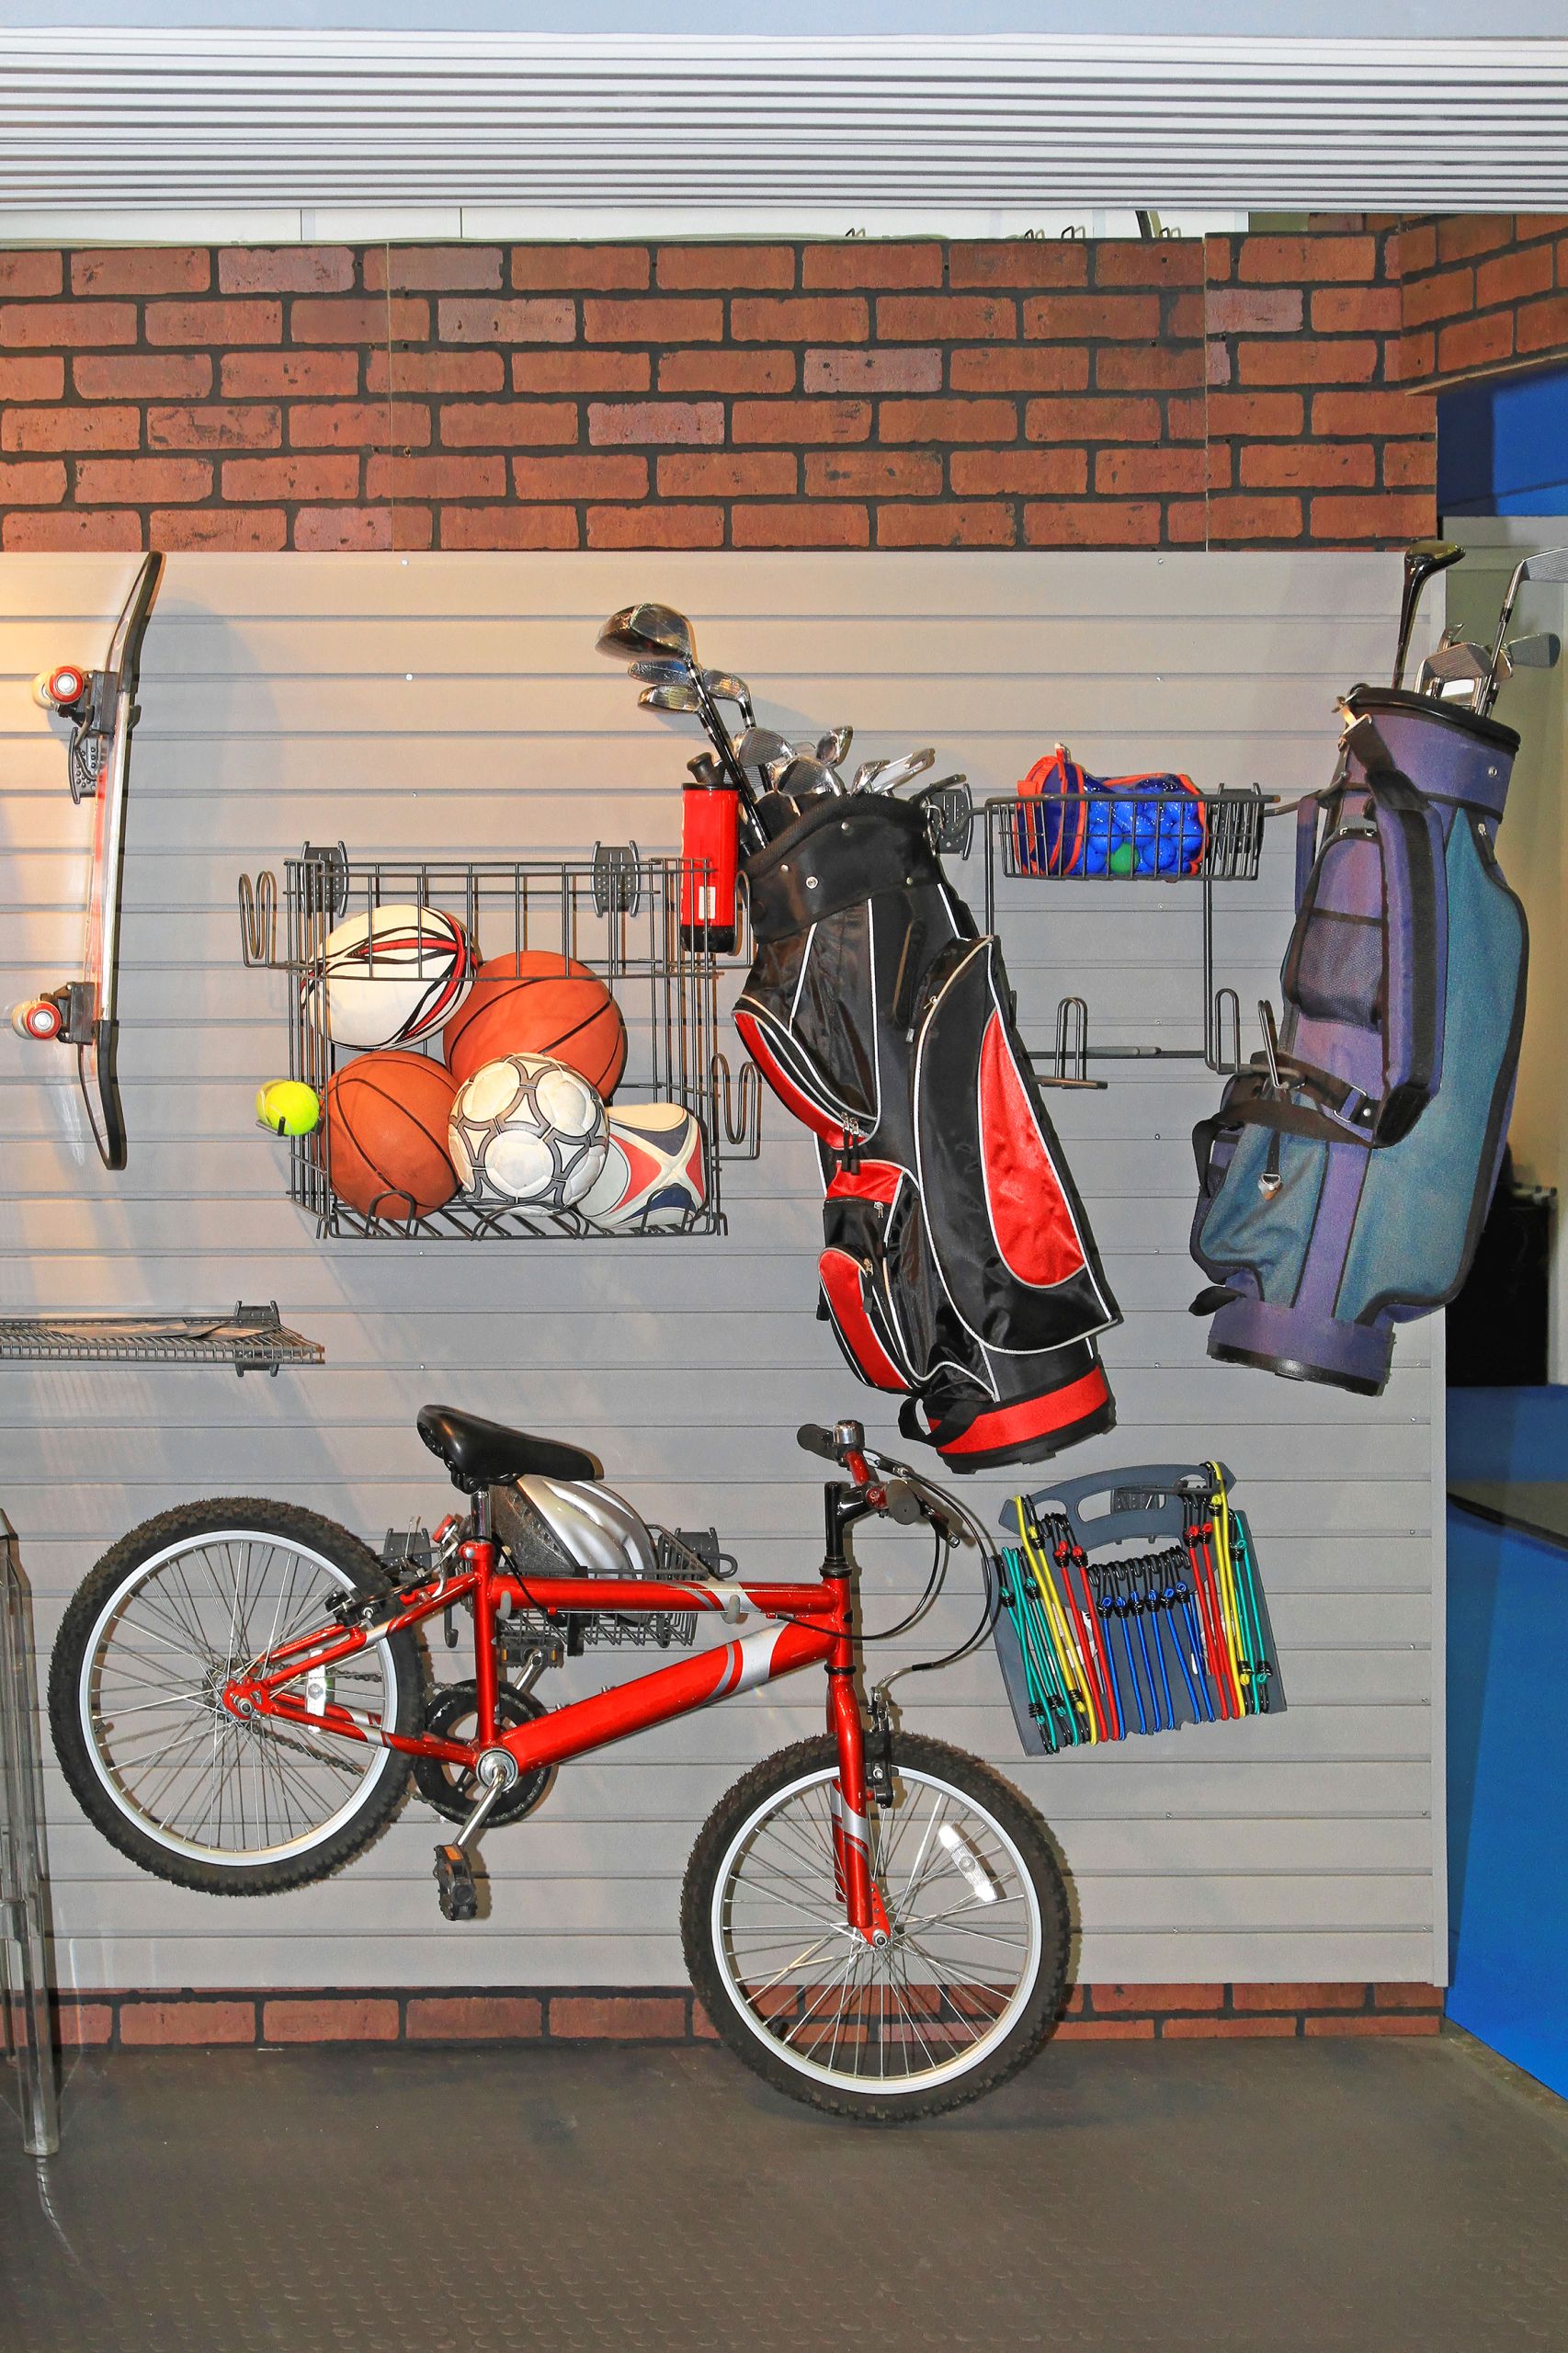 Garage Storage: 5 Tips To Organize and Maintain A Well-Neglected Space 2